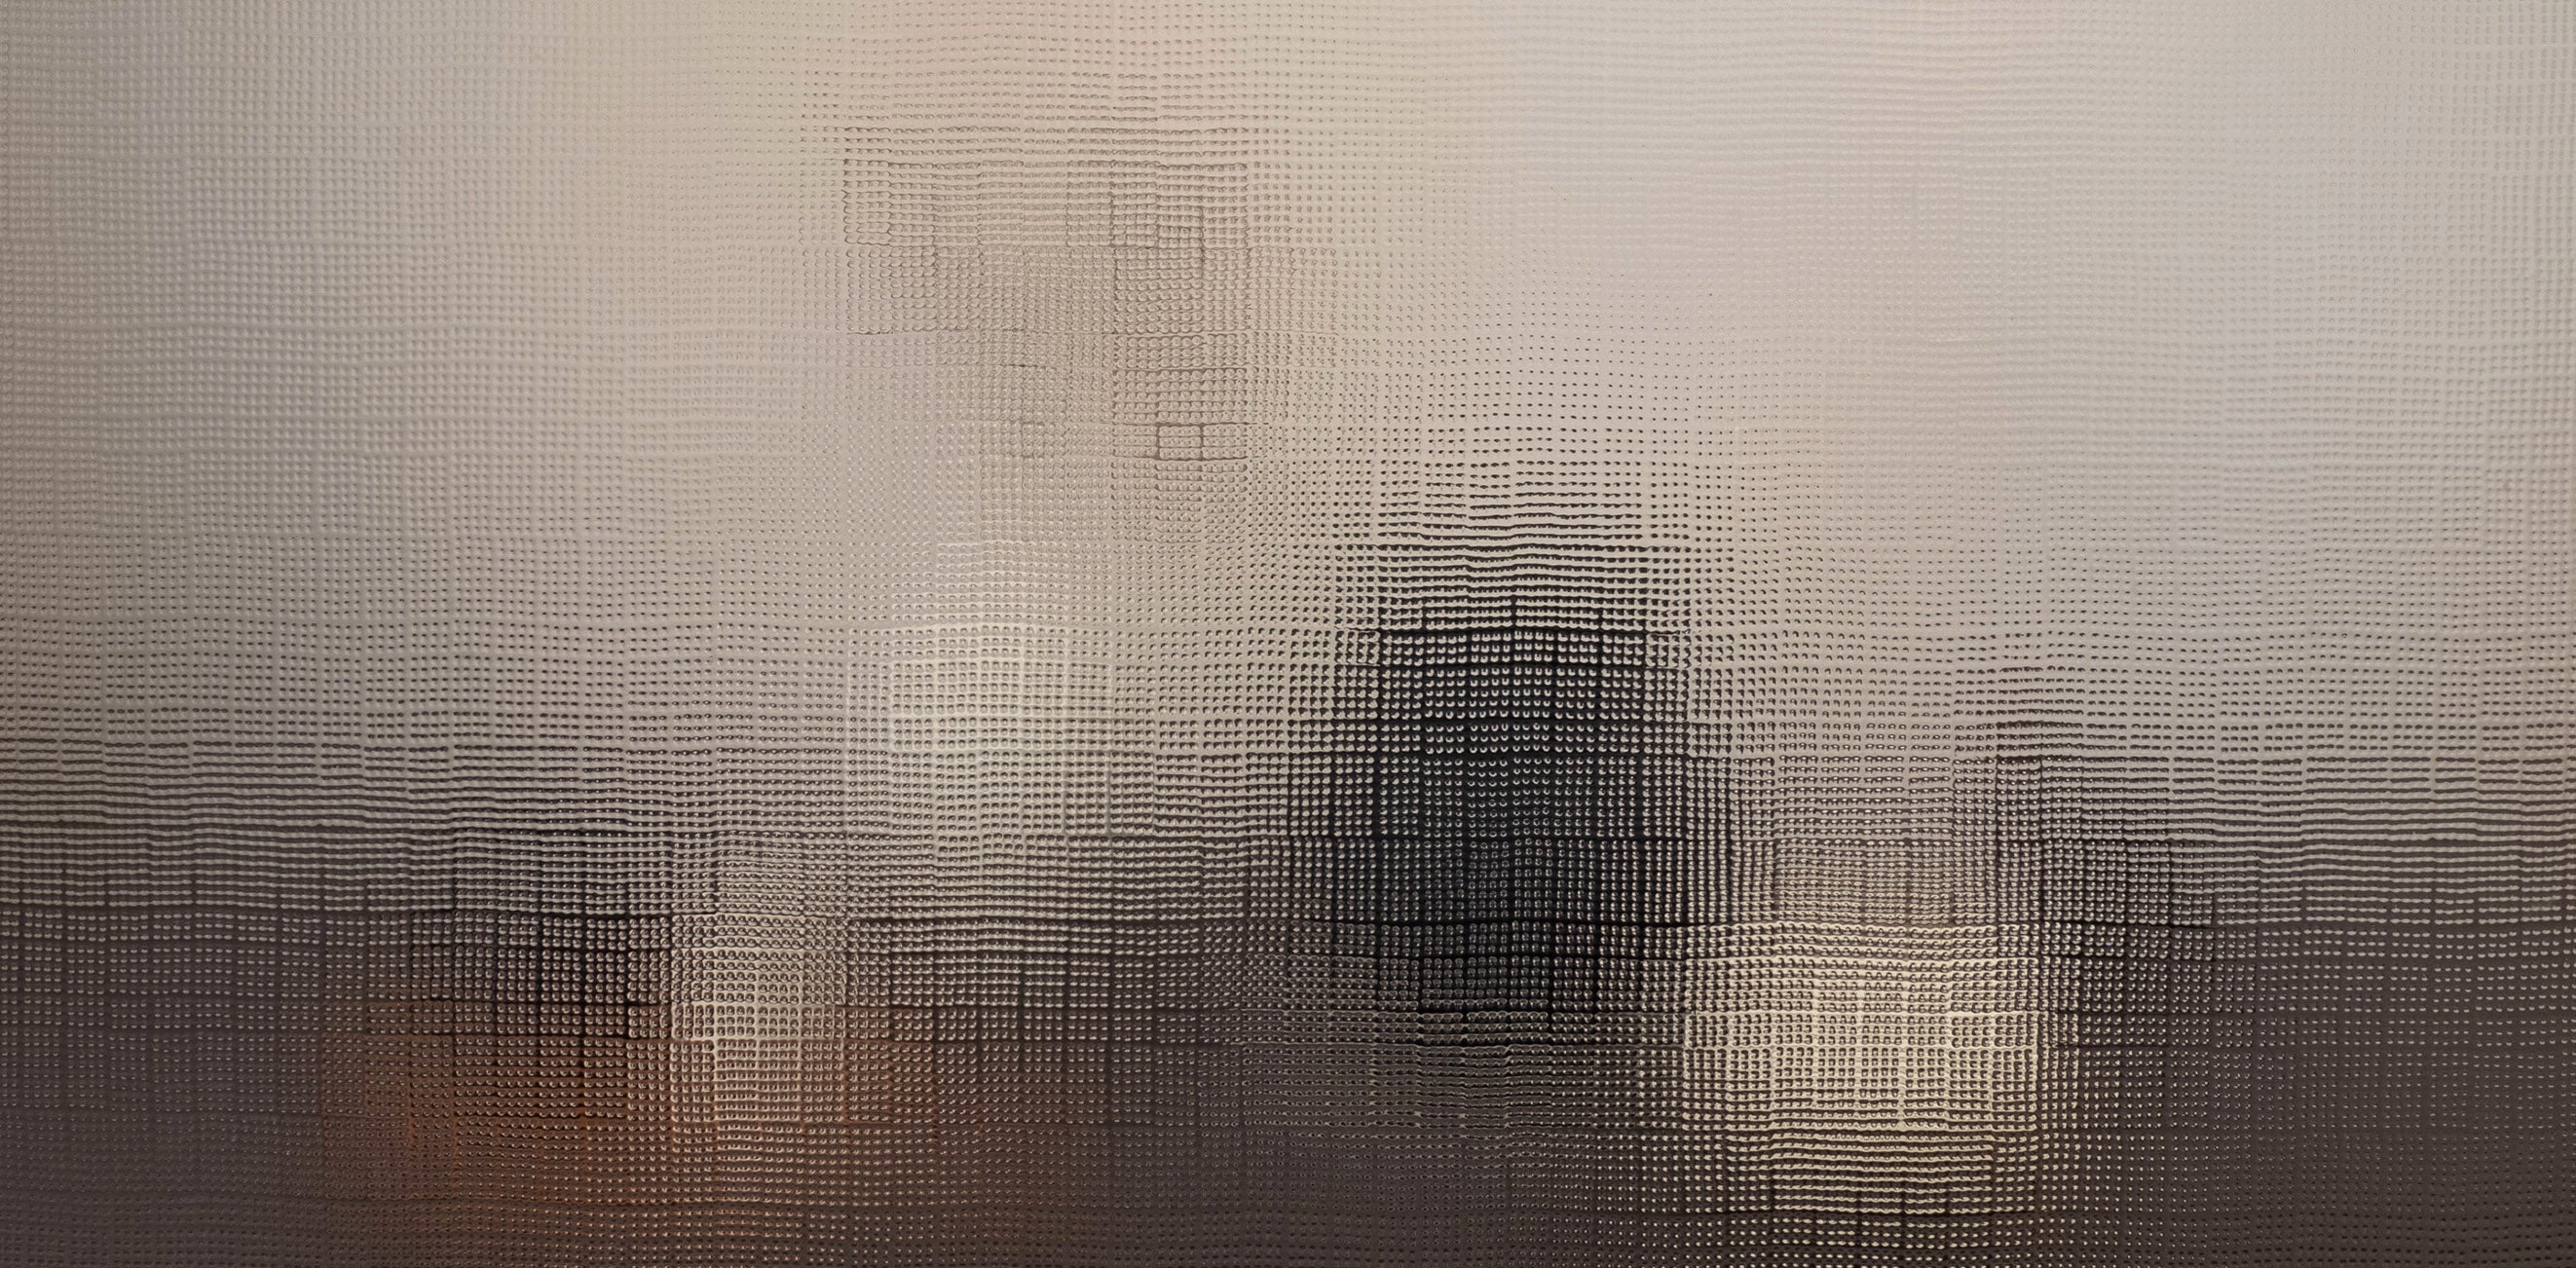 An image of a still life setting, obscured by the City Block window film in order to exhibit the privacy level of the selected film.